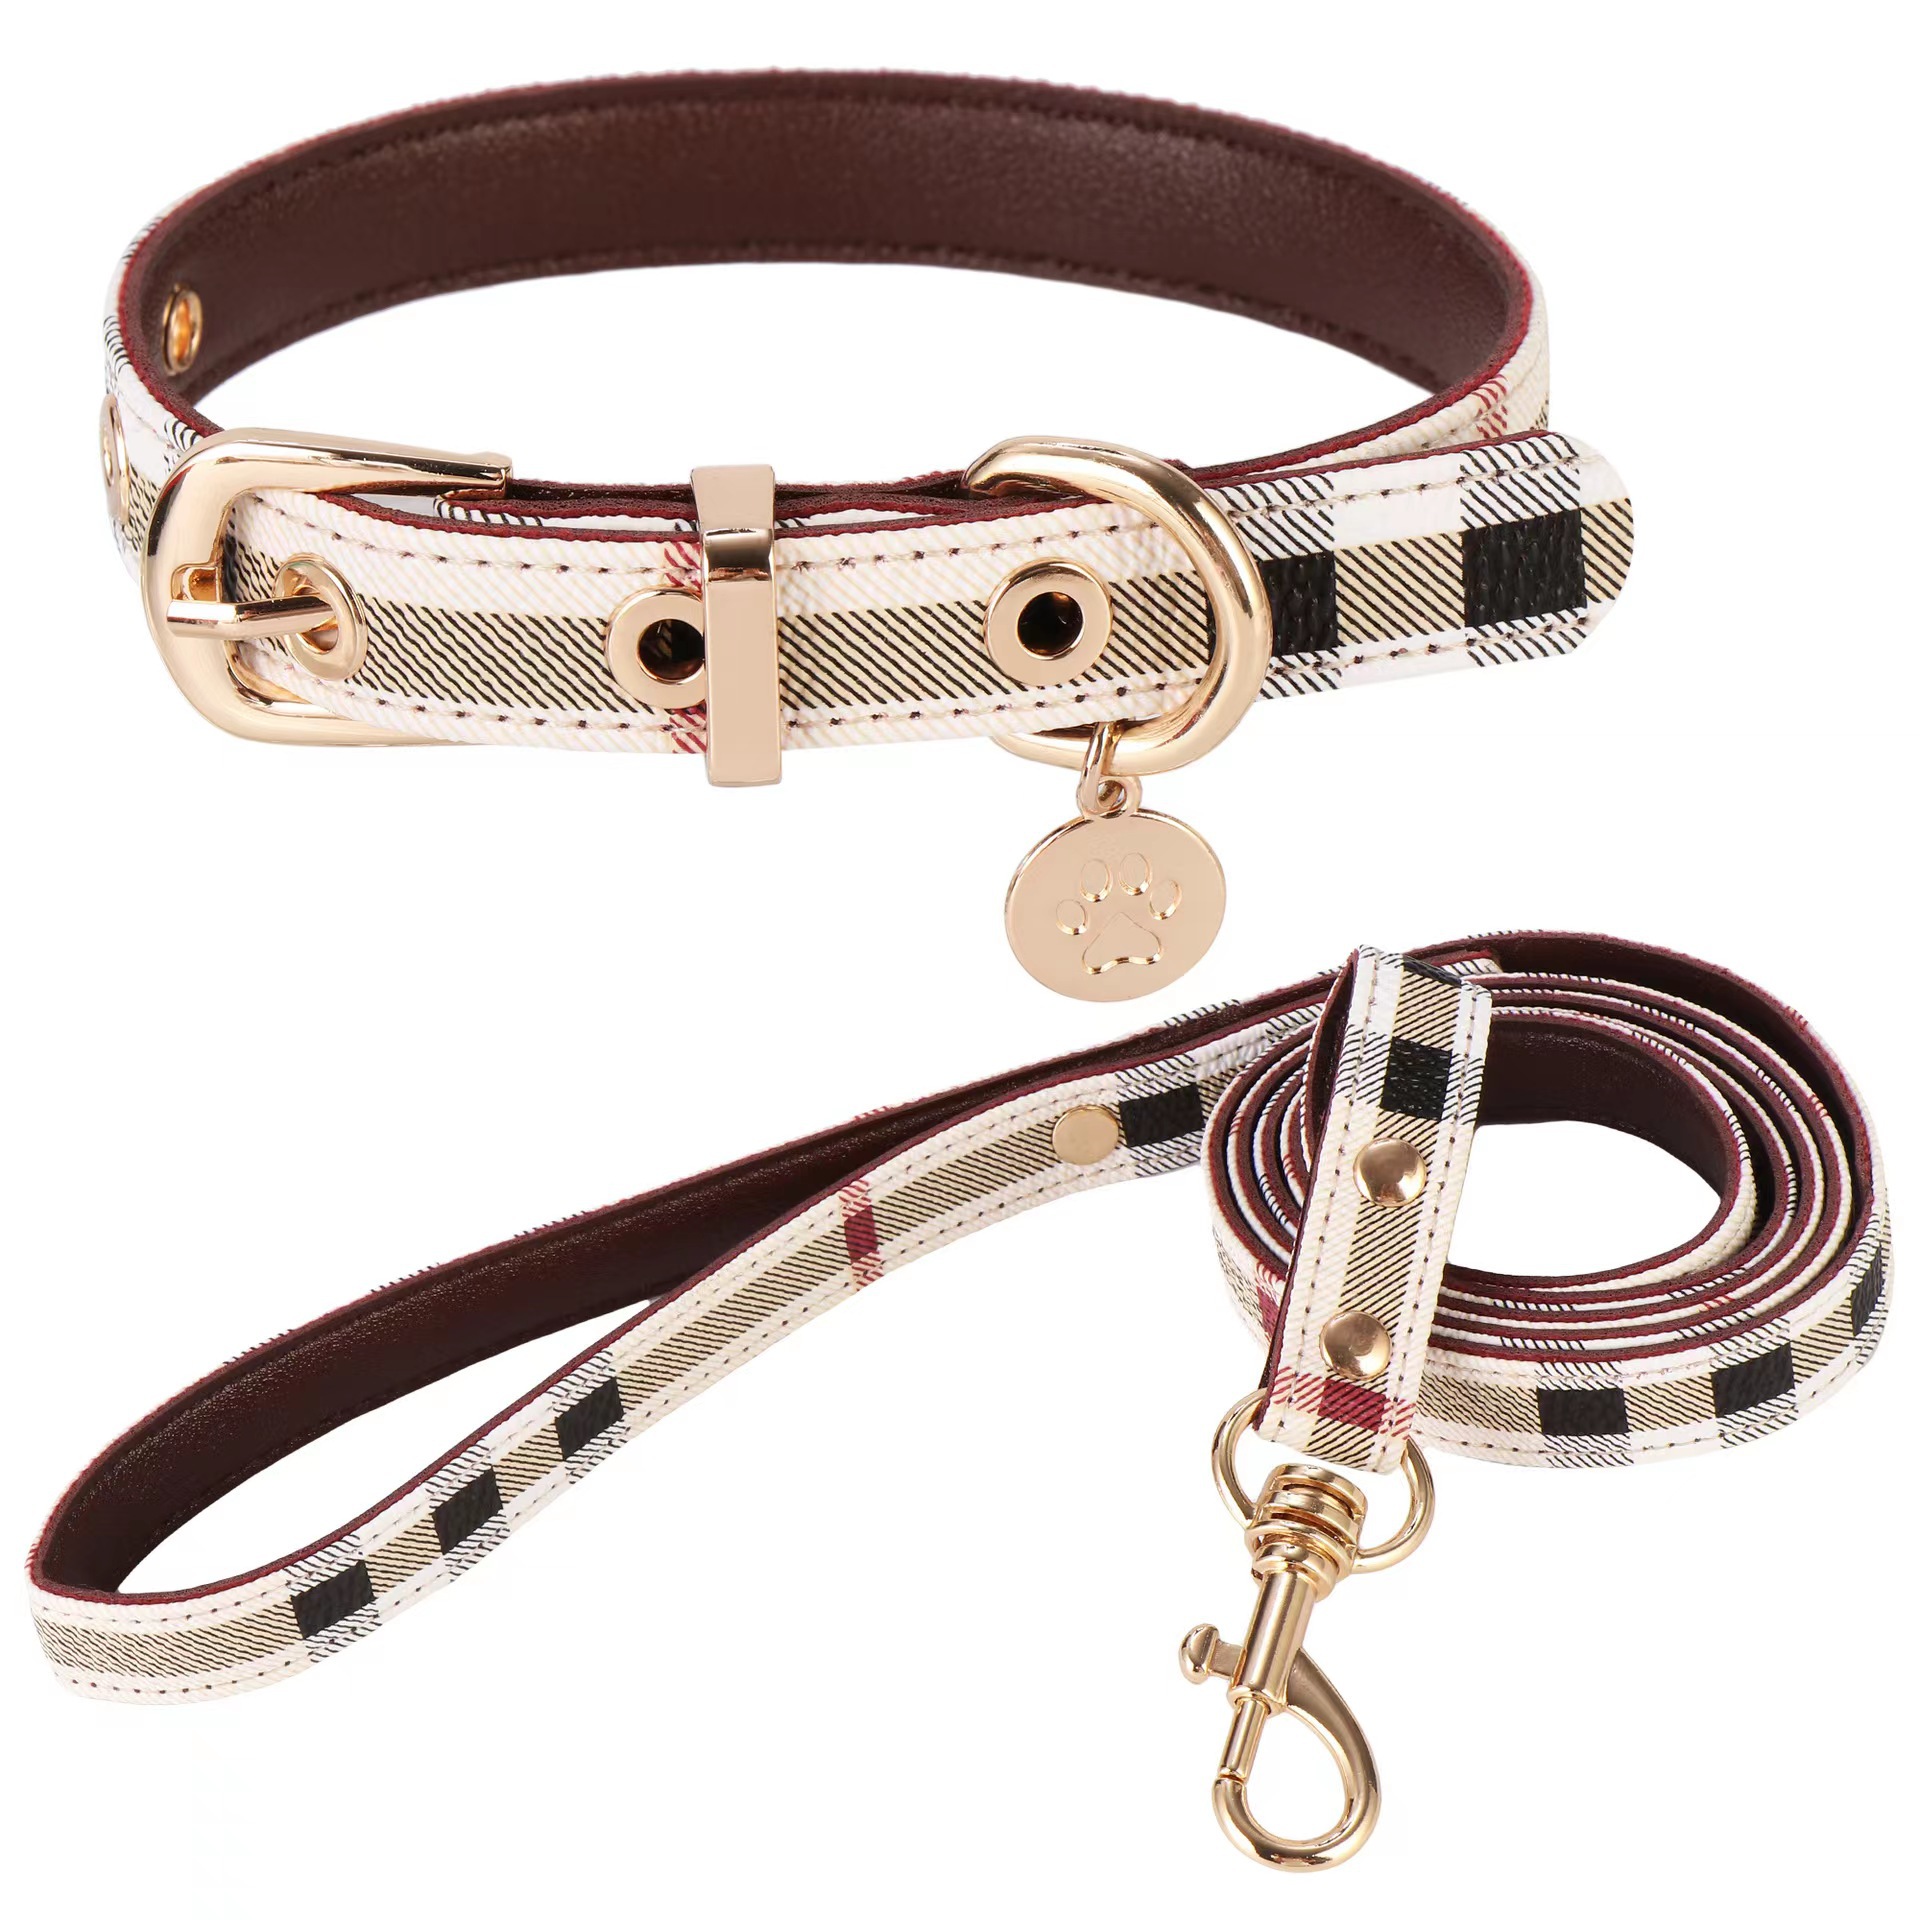 

Leather Designer Dogs Collar Leashes Set Classic Plaid Pet Leash Step in Dog Harness for Small Medium Dogs Cat Chihuahua Bulldog Poodle Brown S Wholesale